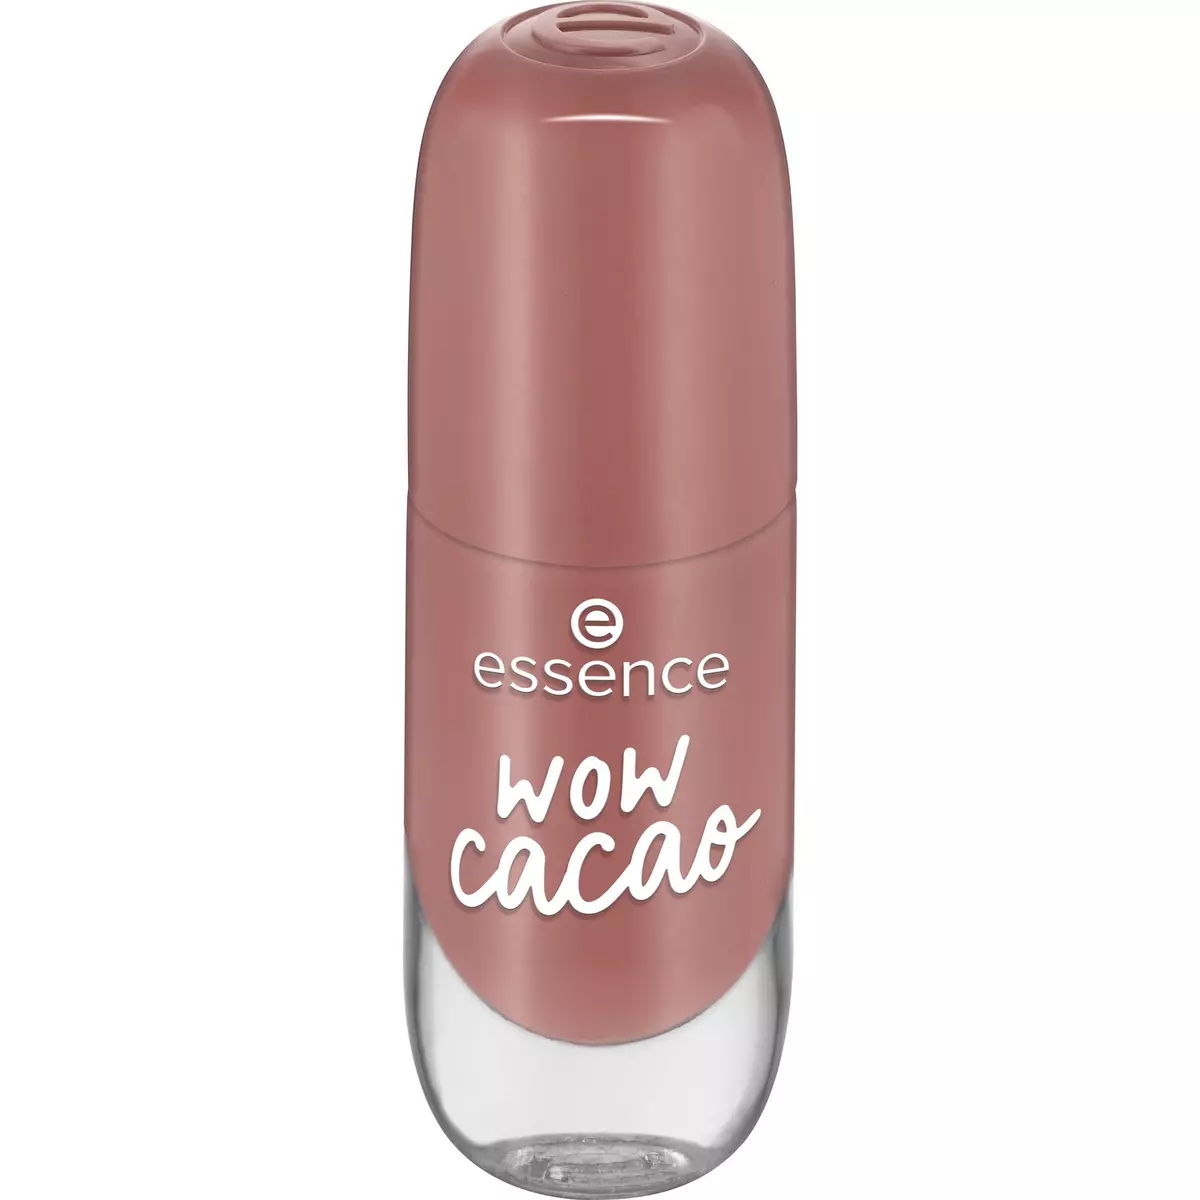 ESSENCE Vernis à ongles wow cacao n°26 8ml